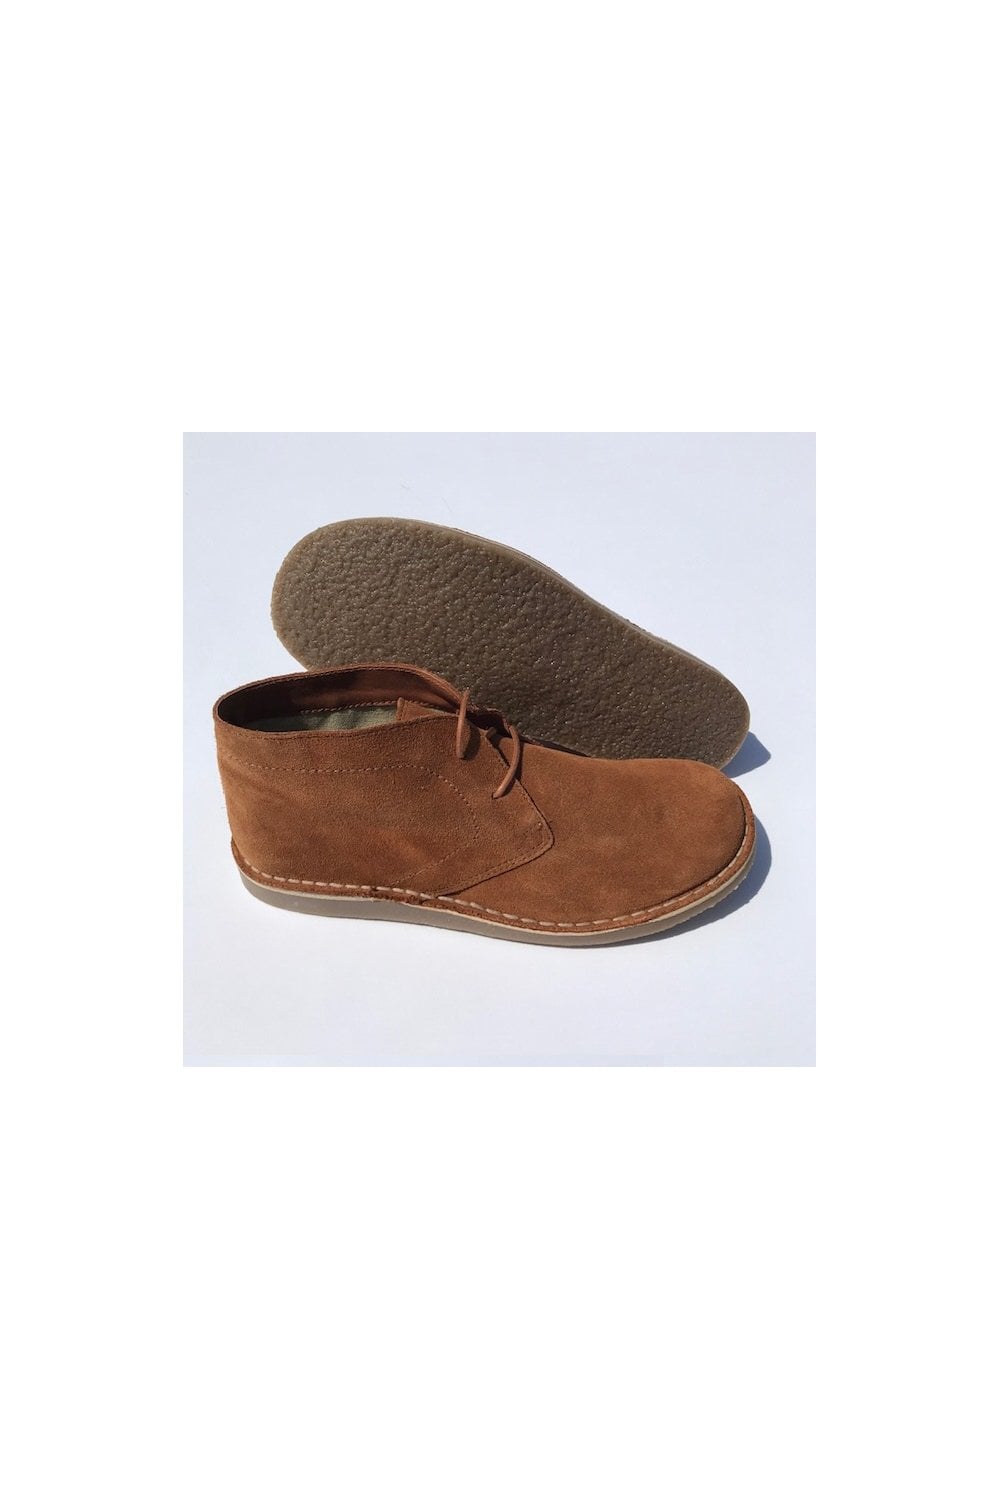 DELICIOUS JUNCTION Crowley Desert Boot Ginger - Raw Menswear